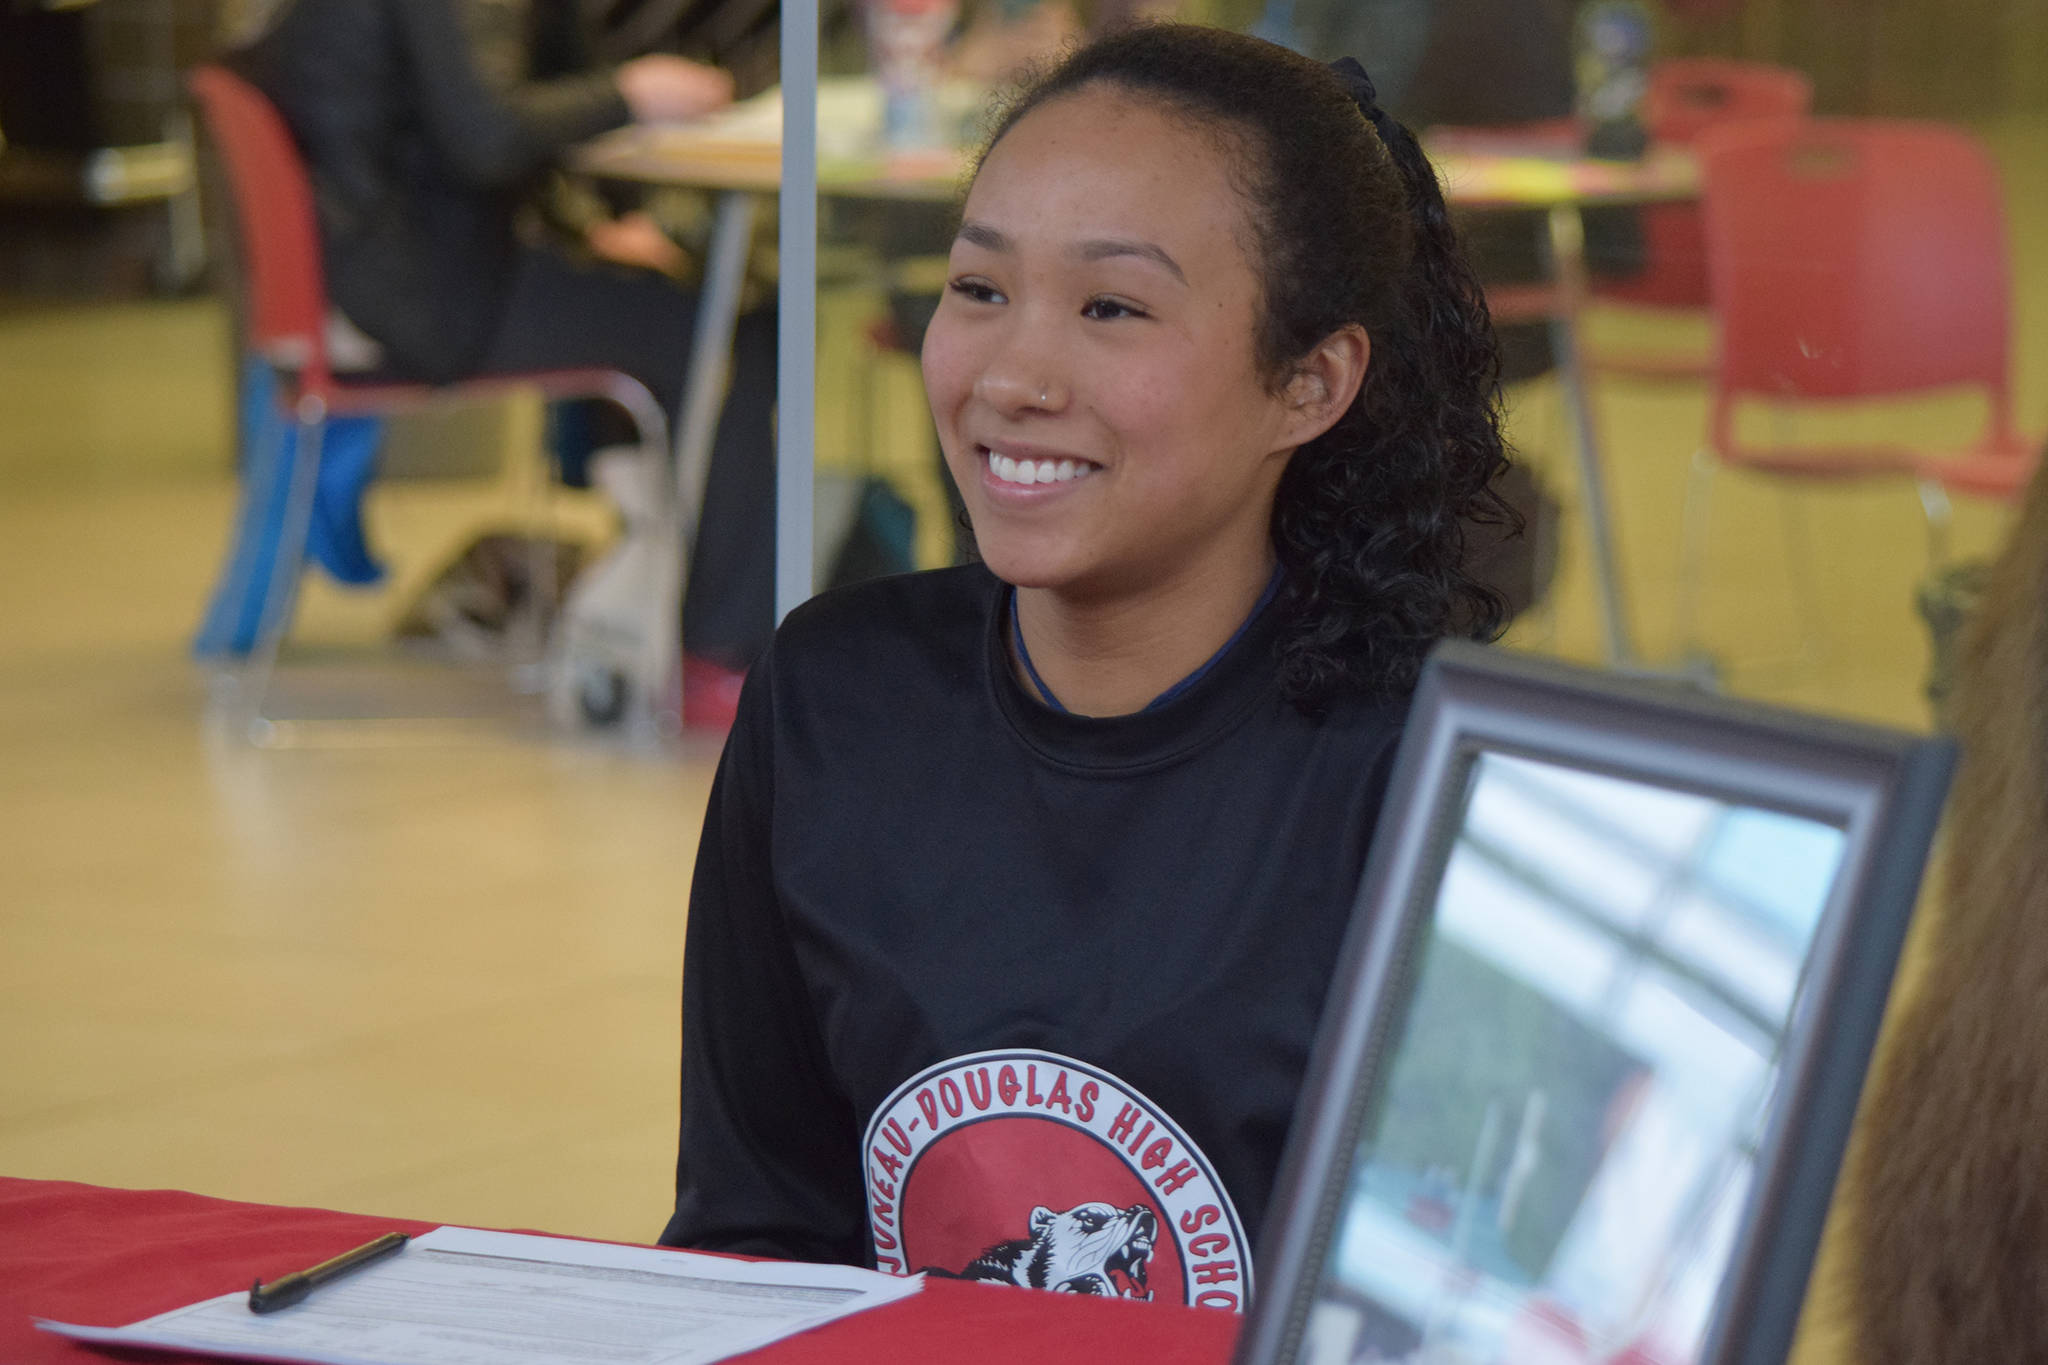 Juneau-Douglas High School senior Malia Miller finishes signing a National Letter of Intent with Bellevue College at the JDHS commons on Thursday, March 14, 2019. (Nolin Ainsworth | Juneau Empire)